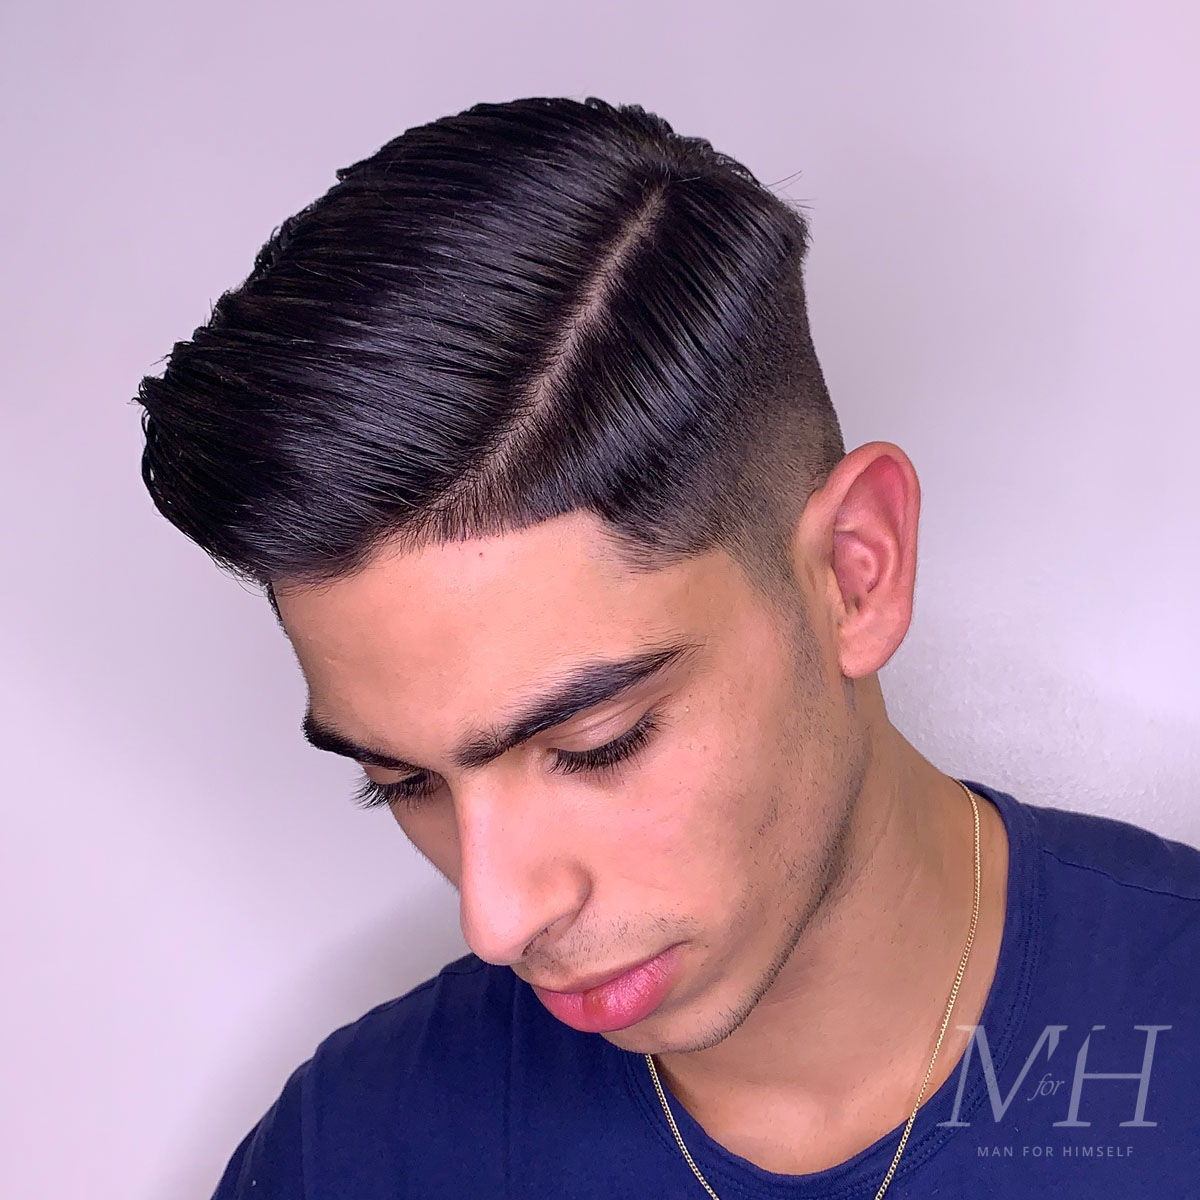 7 Classic Side-Part Hairstyles For Men | Hairstyling Tips & Advice